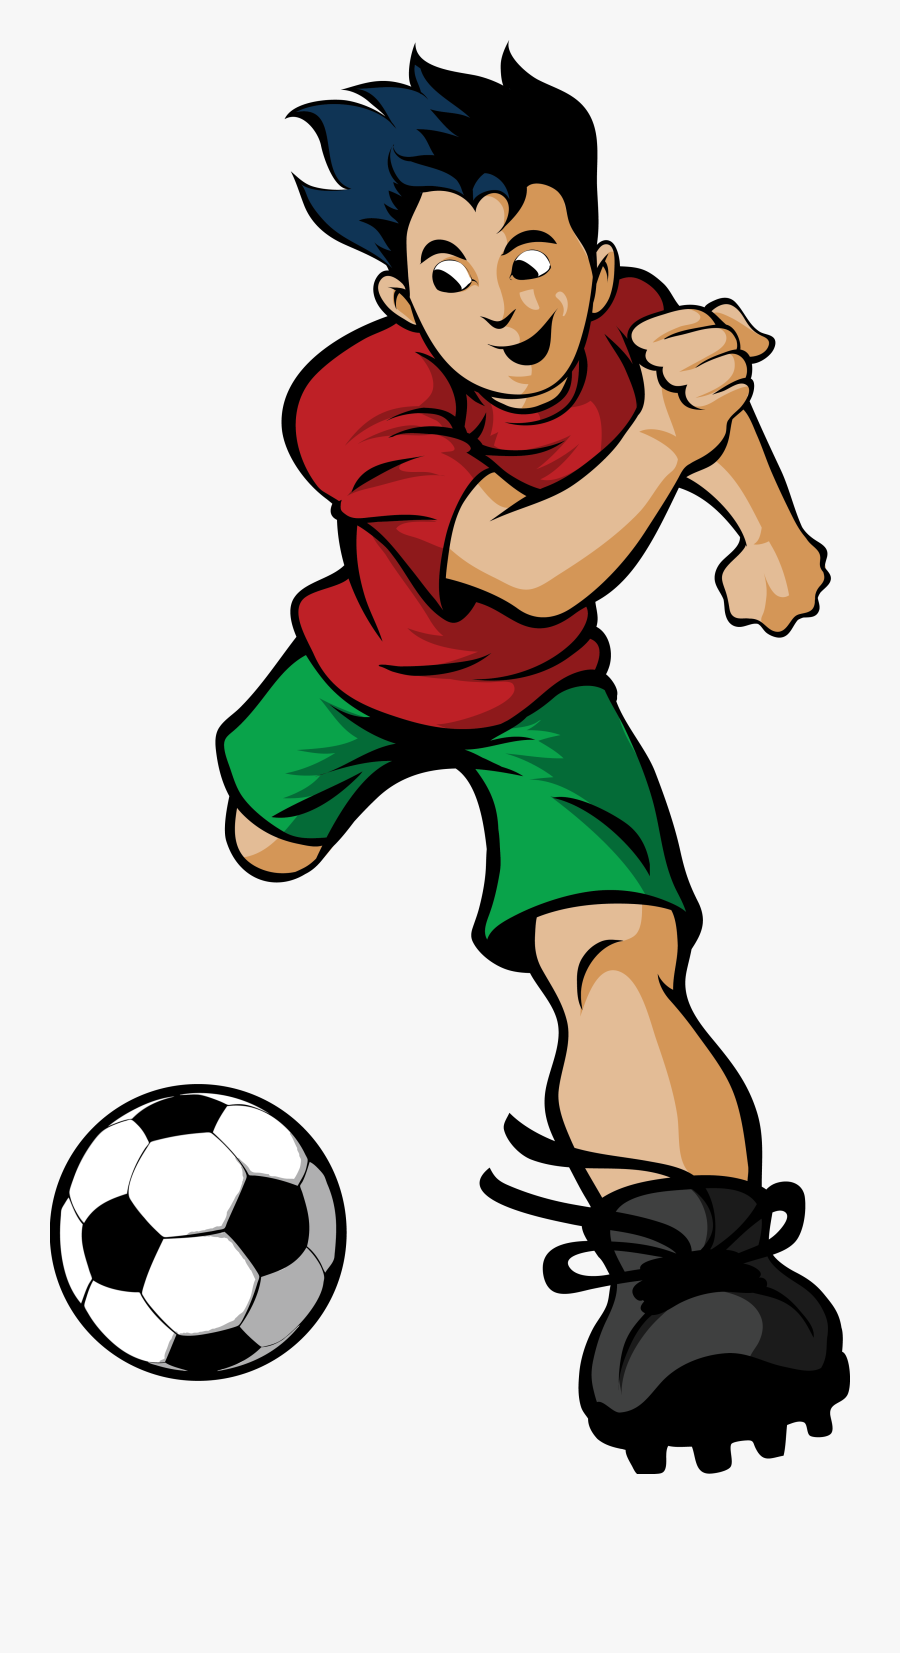 Soccer Toon Png, Transparent Clipart